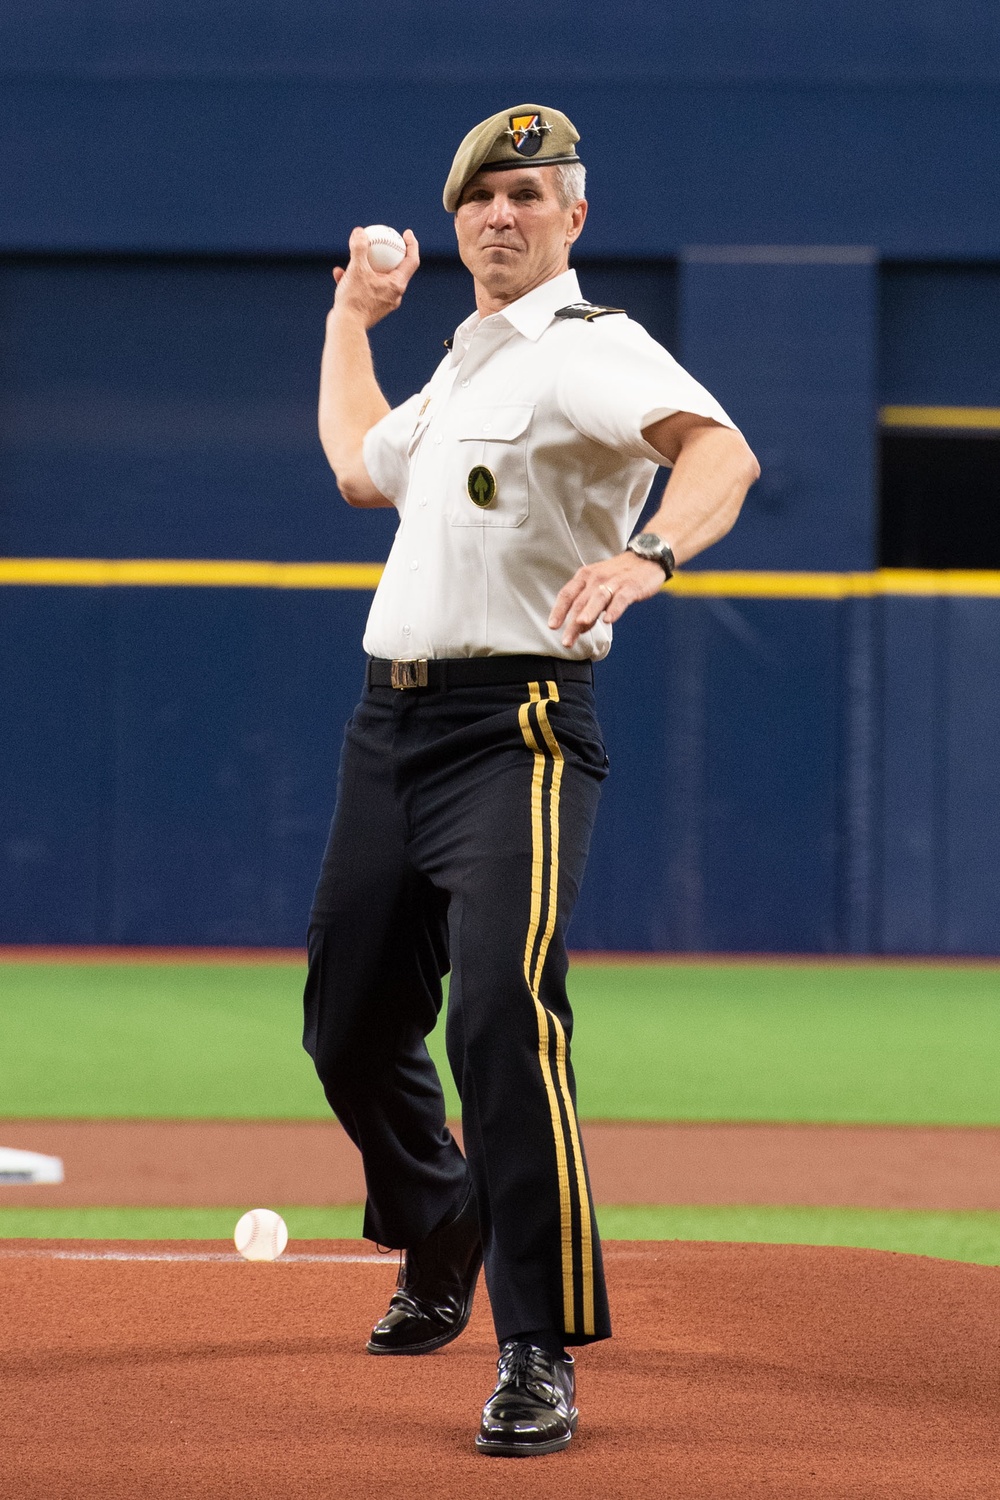 USSOCOM commander throws first pitch